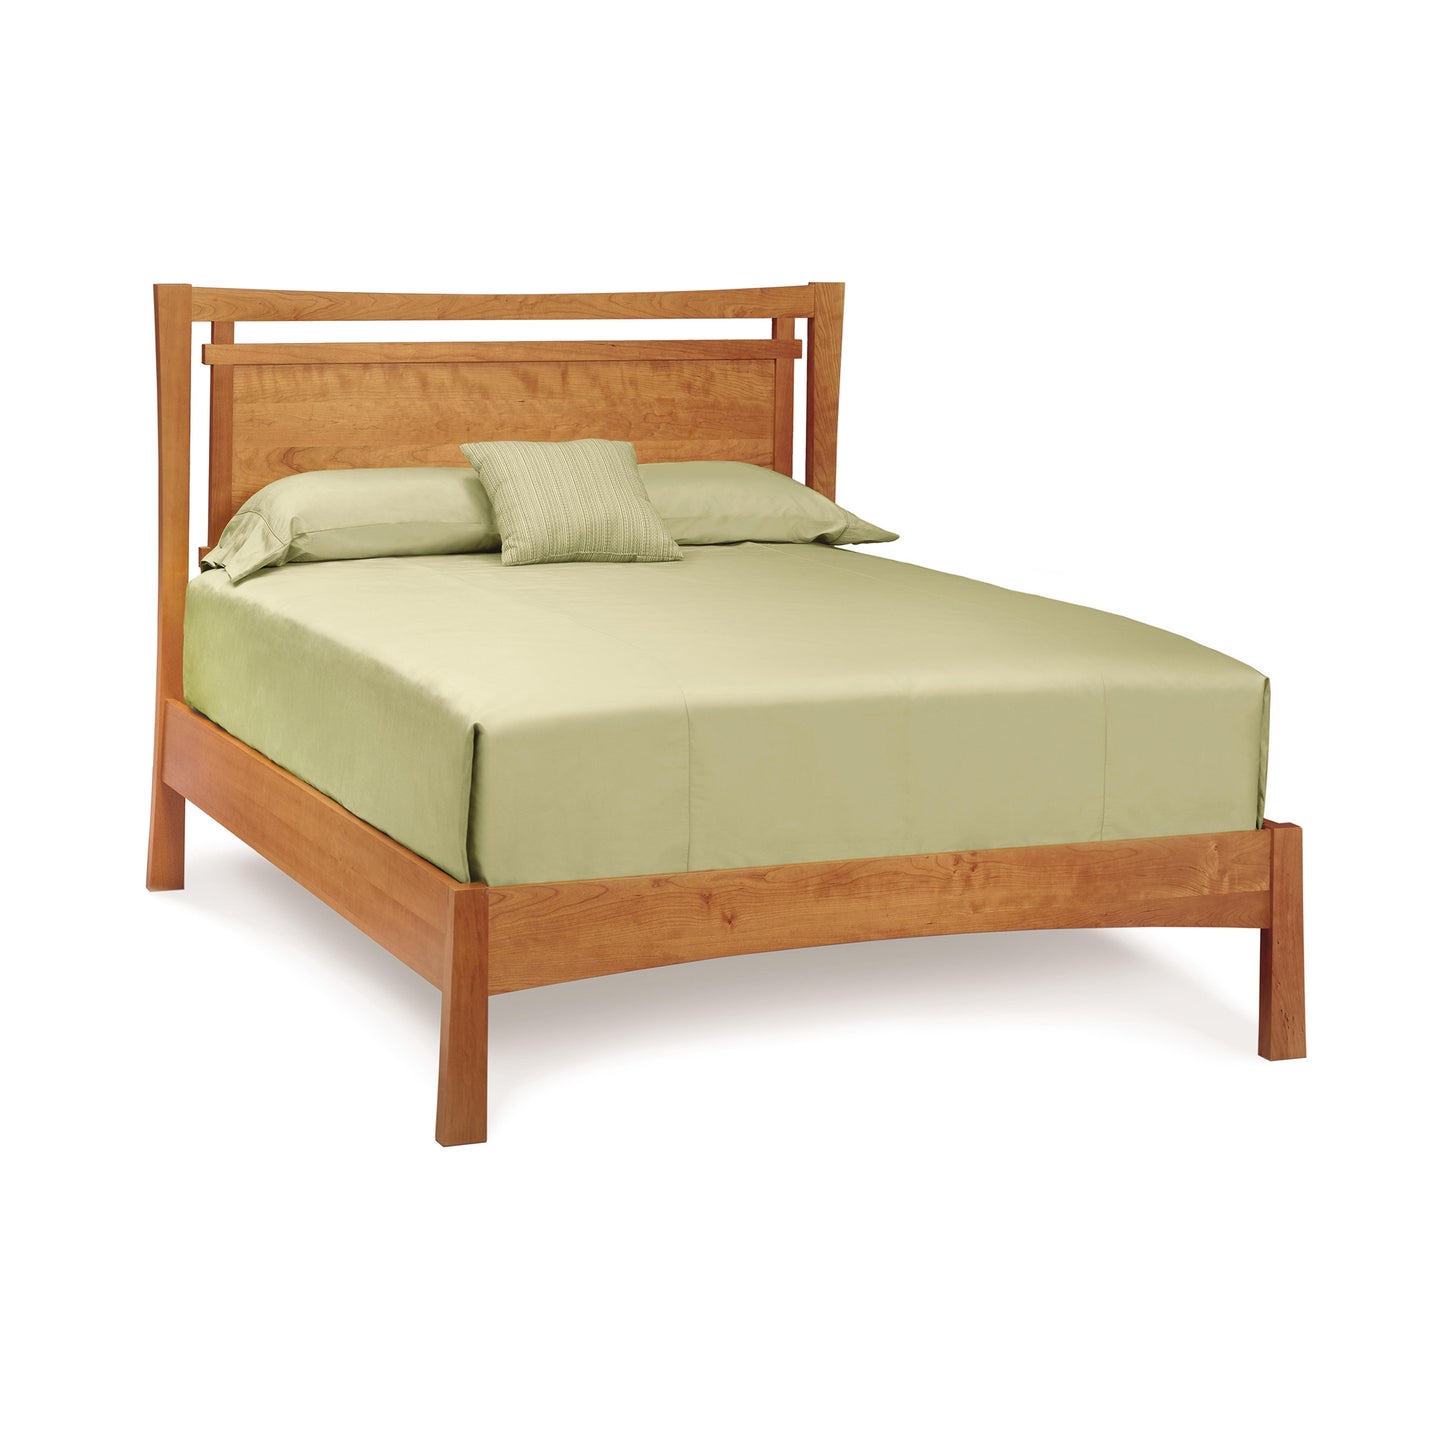 An eco-friendly Copeland Furniture Monterey Platform Bed made of solid cherry wood with a green sheet set in a white background.